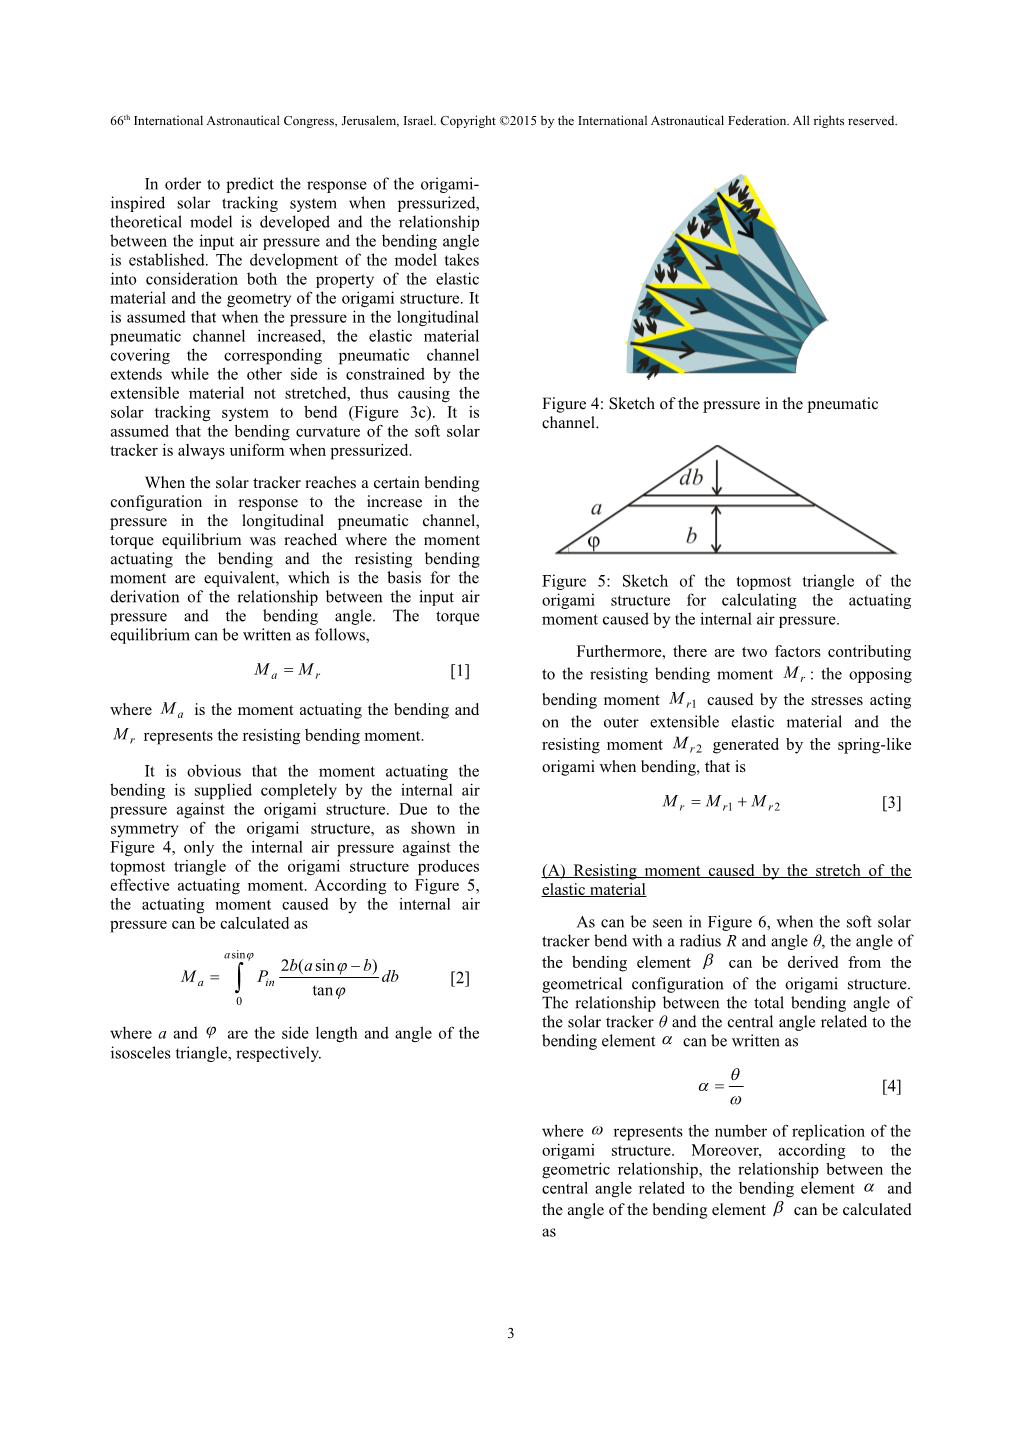 Structure Design and Modelling of an Origami-Inspired Pneumatic Solar Tracking System For